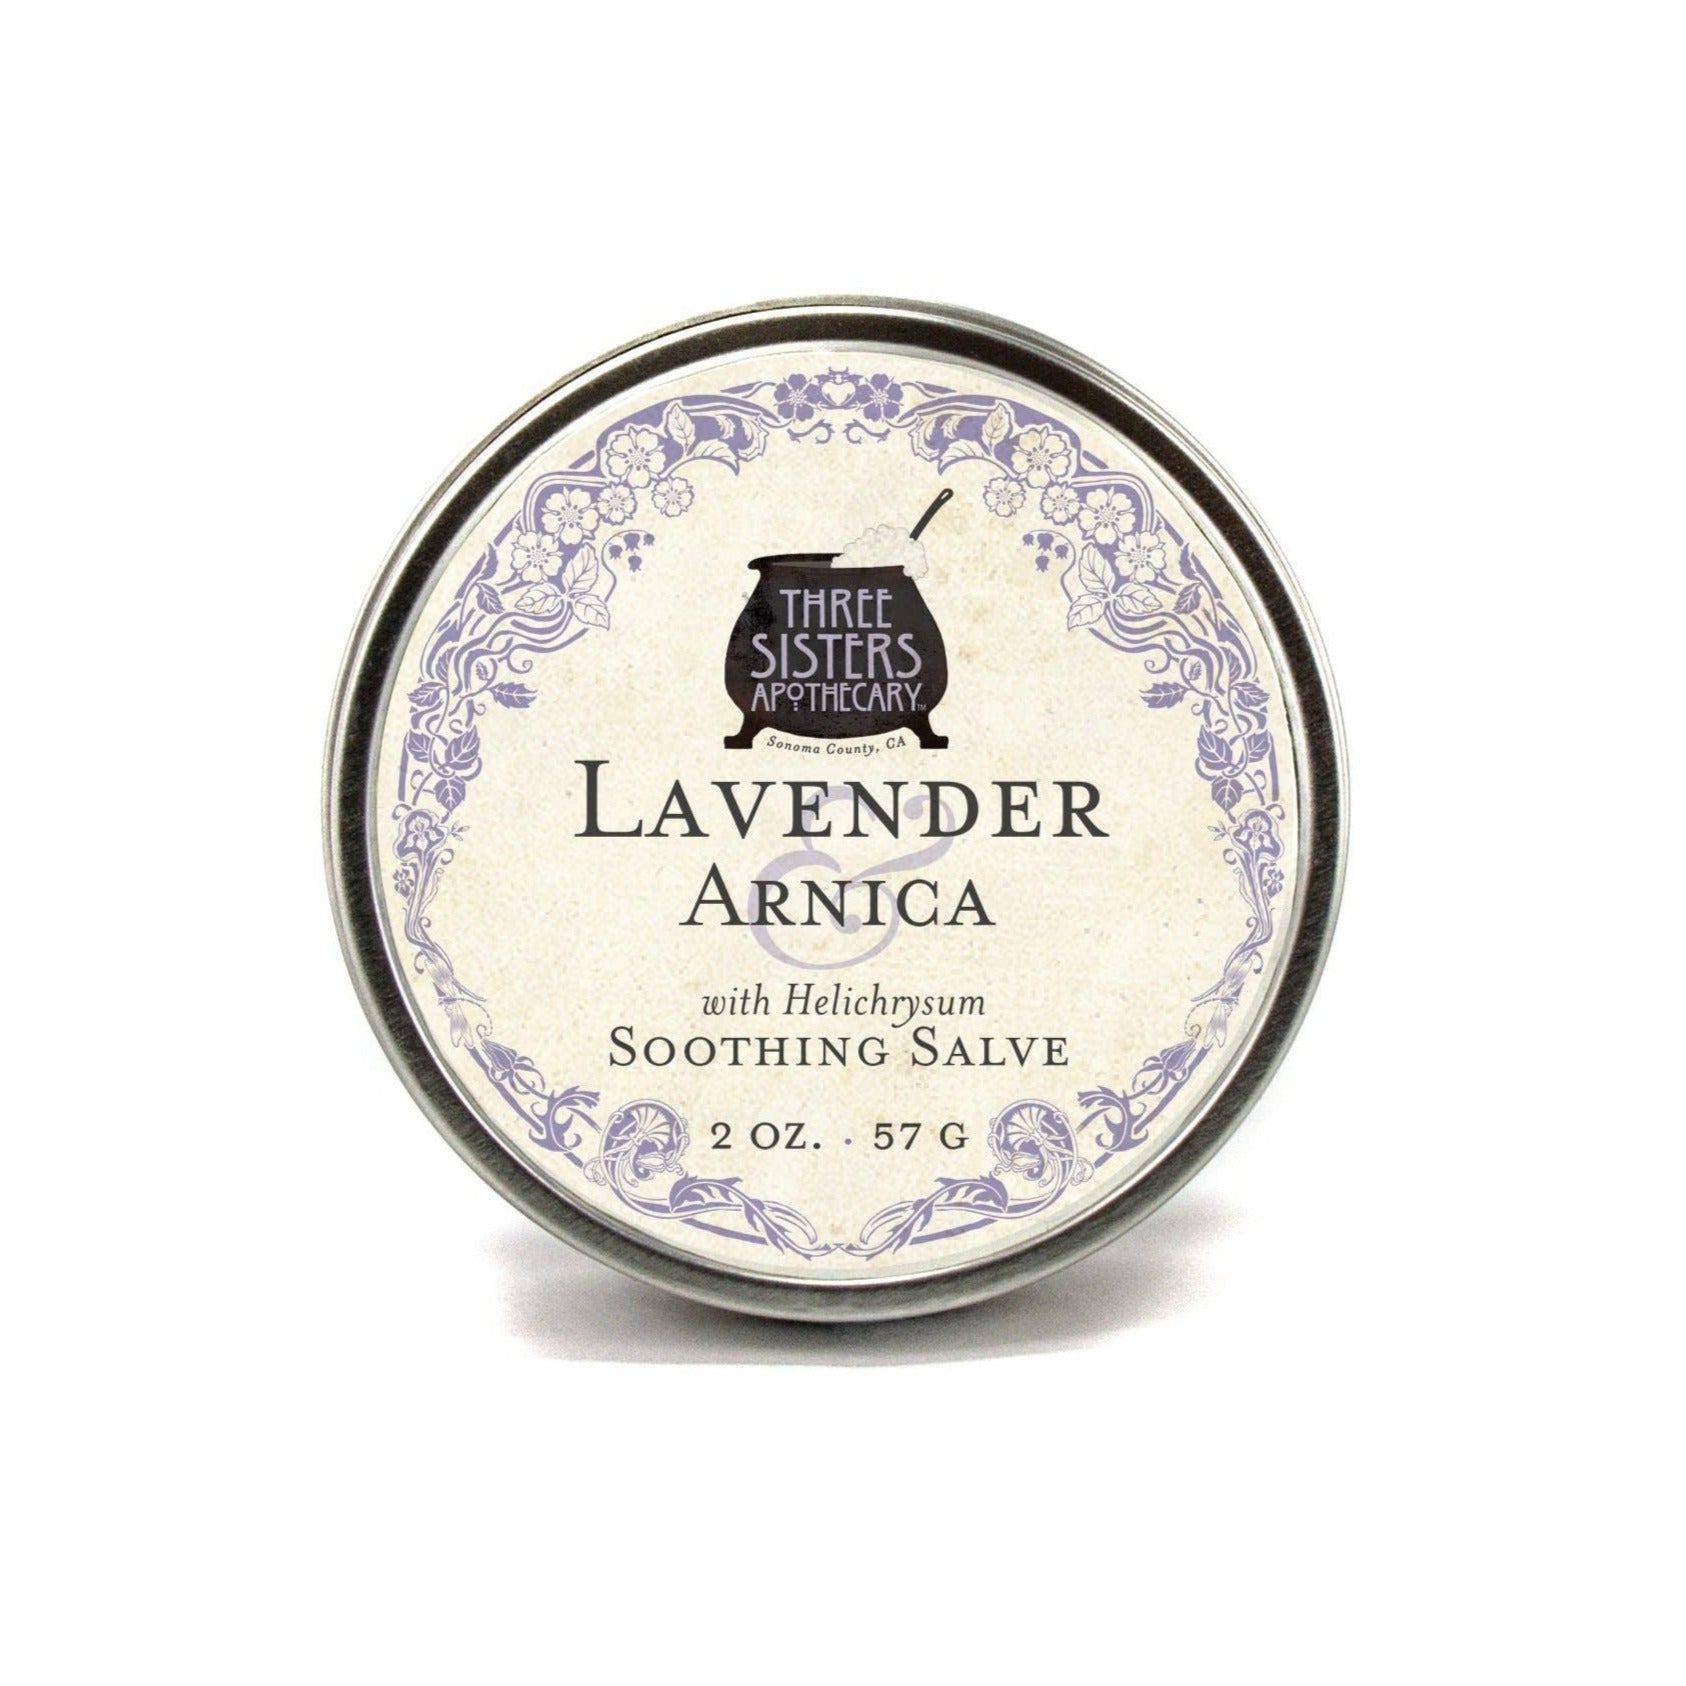 Three Sisters Apothecary Soothing Salve